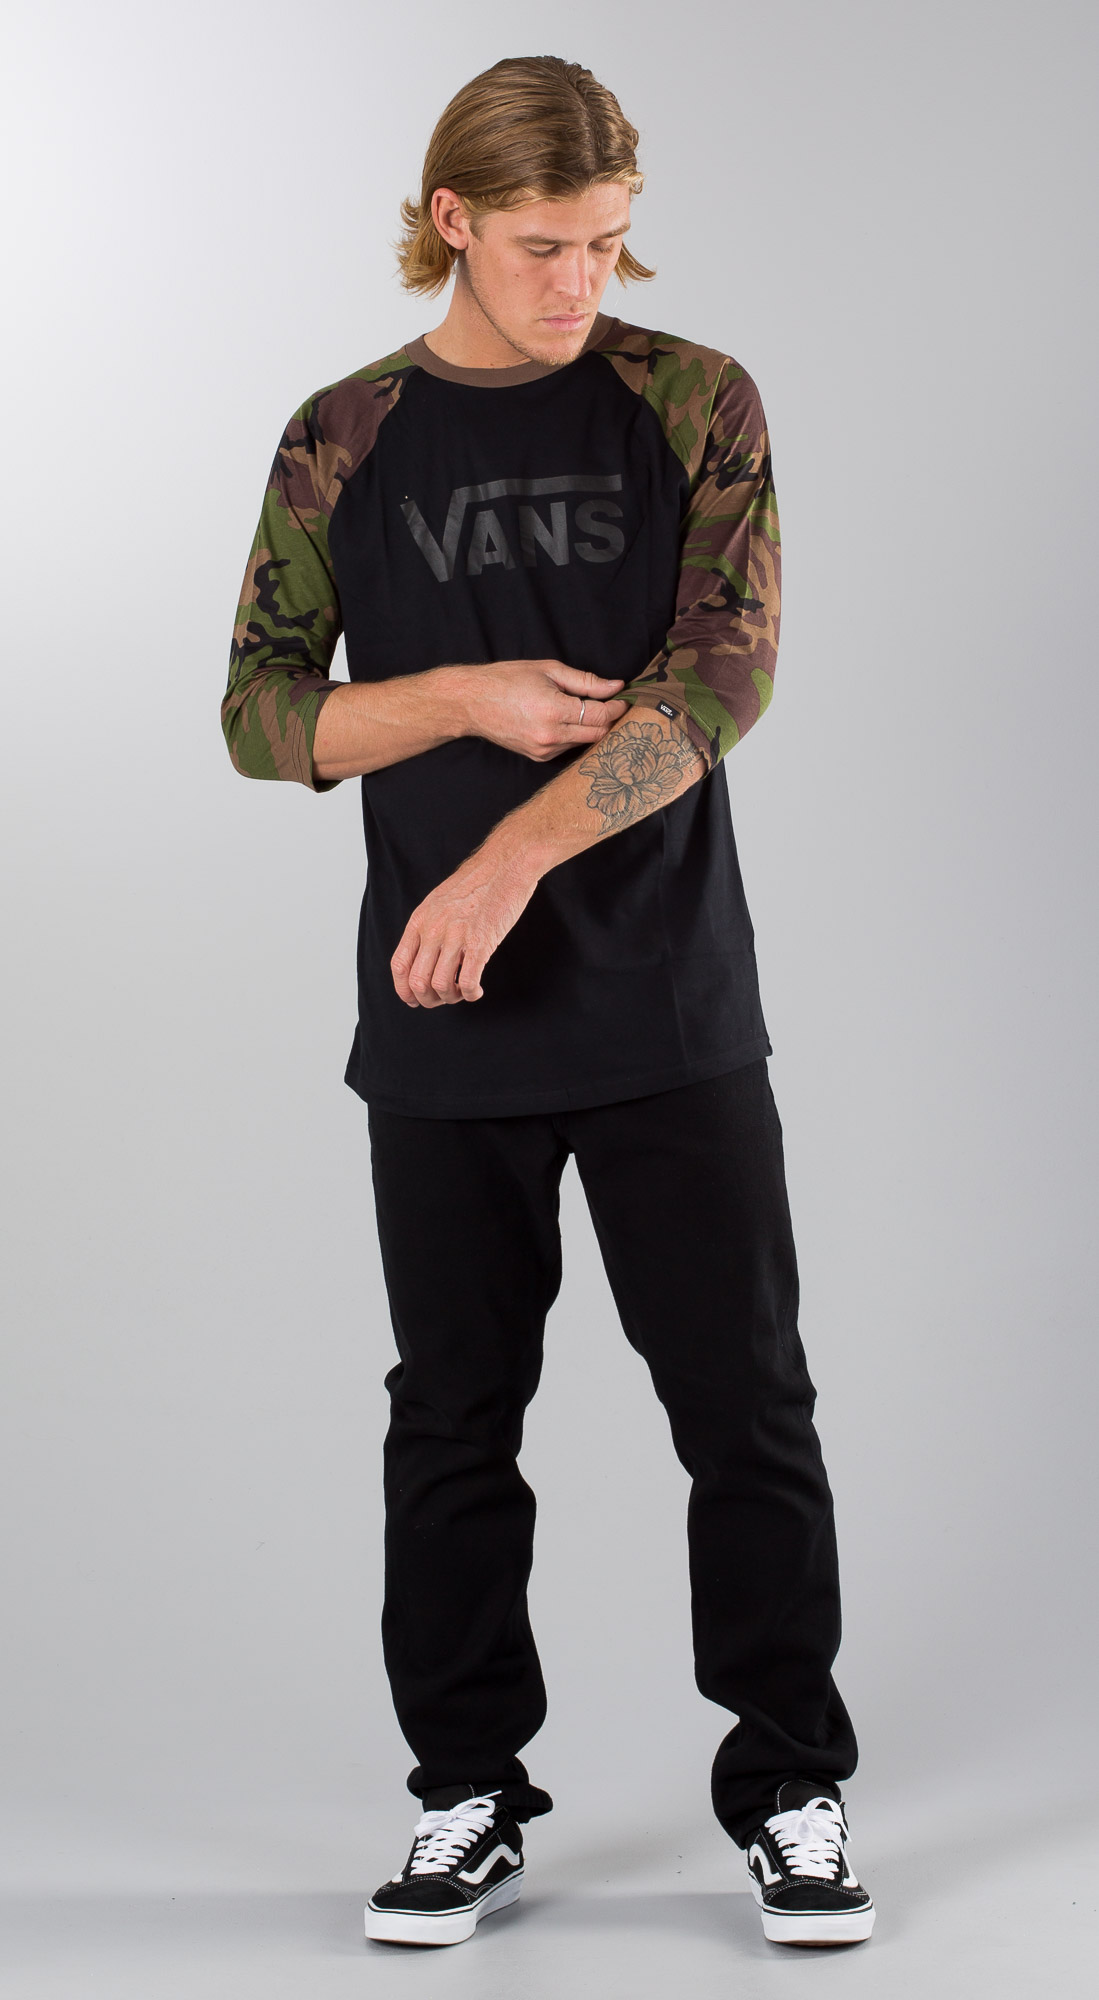 camouflage vans outfit